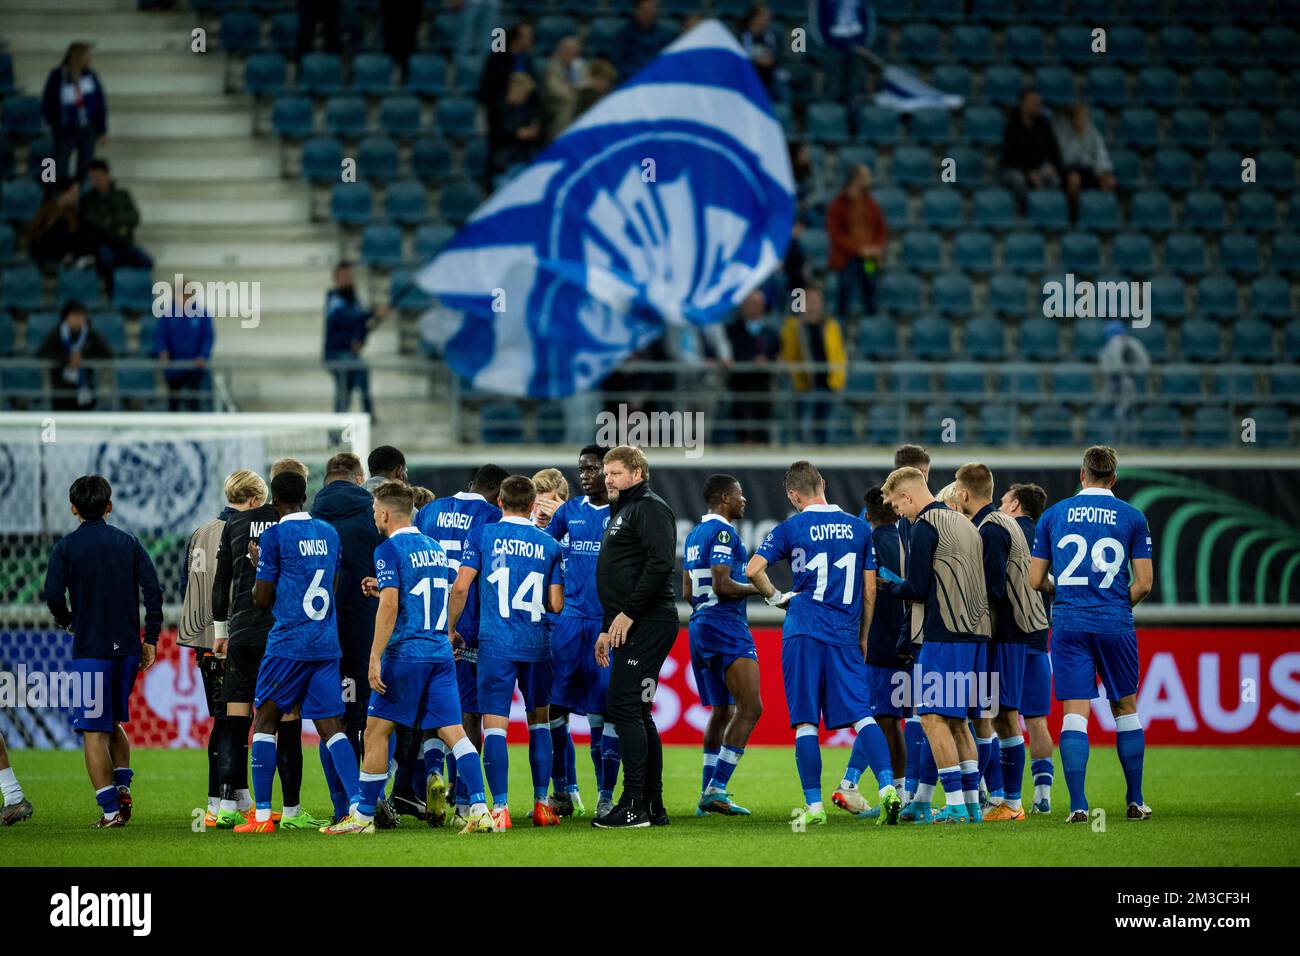 Gent's head coach Hein Vanhaezebrouck celebrates after winning a soccer match between Belgian KAA Gent and Irish Shamrock Rovers F.C., Thursday 15 September 2022 in Gent, on day two of the UEFA Europa Conference League group stage. BELGA PHOTO JASPER JACOBS Stock Photo